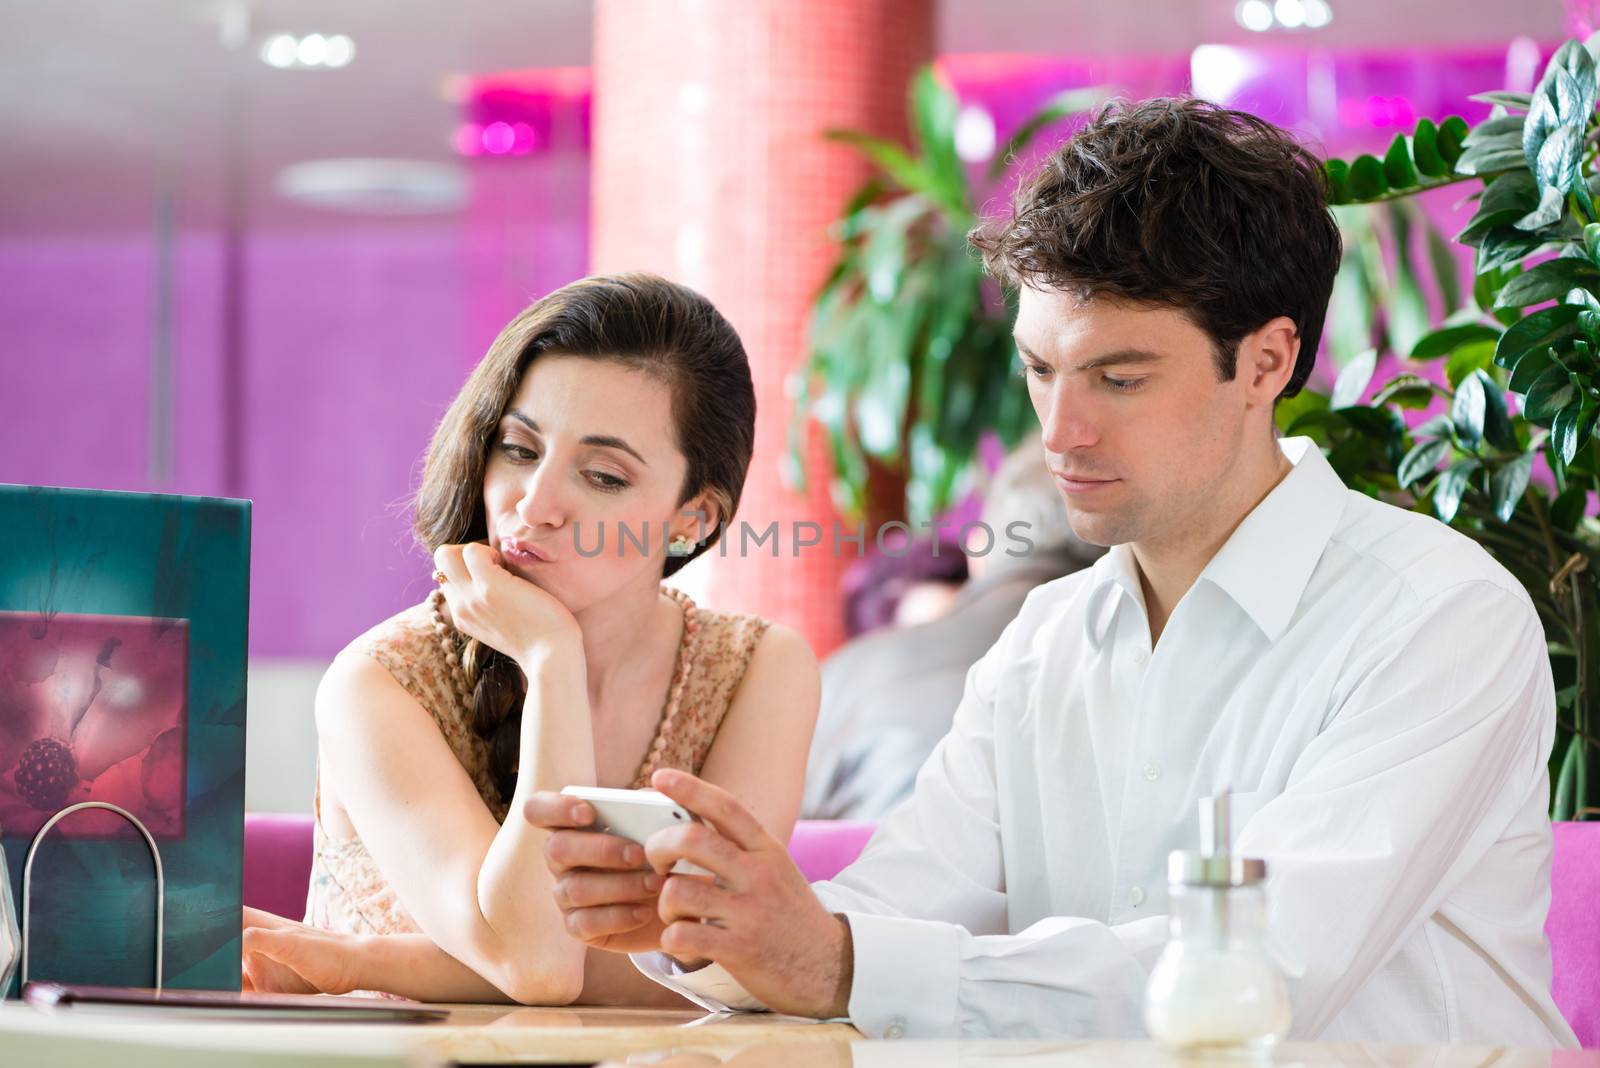 Couple in a cafe spends leisure time together, she is angry because he acts busy on the phone